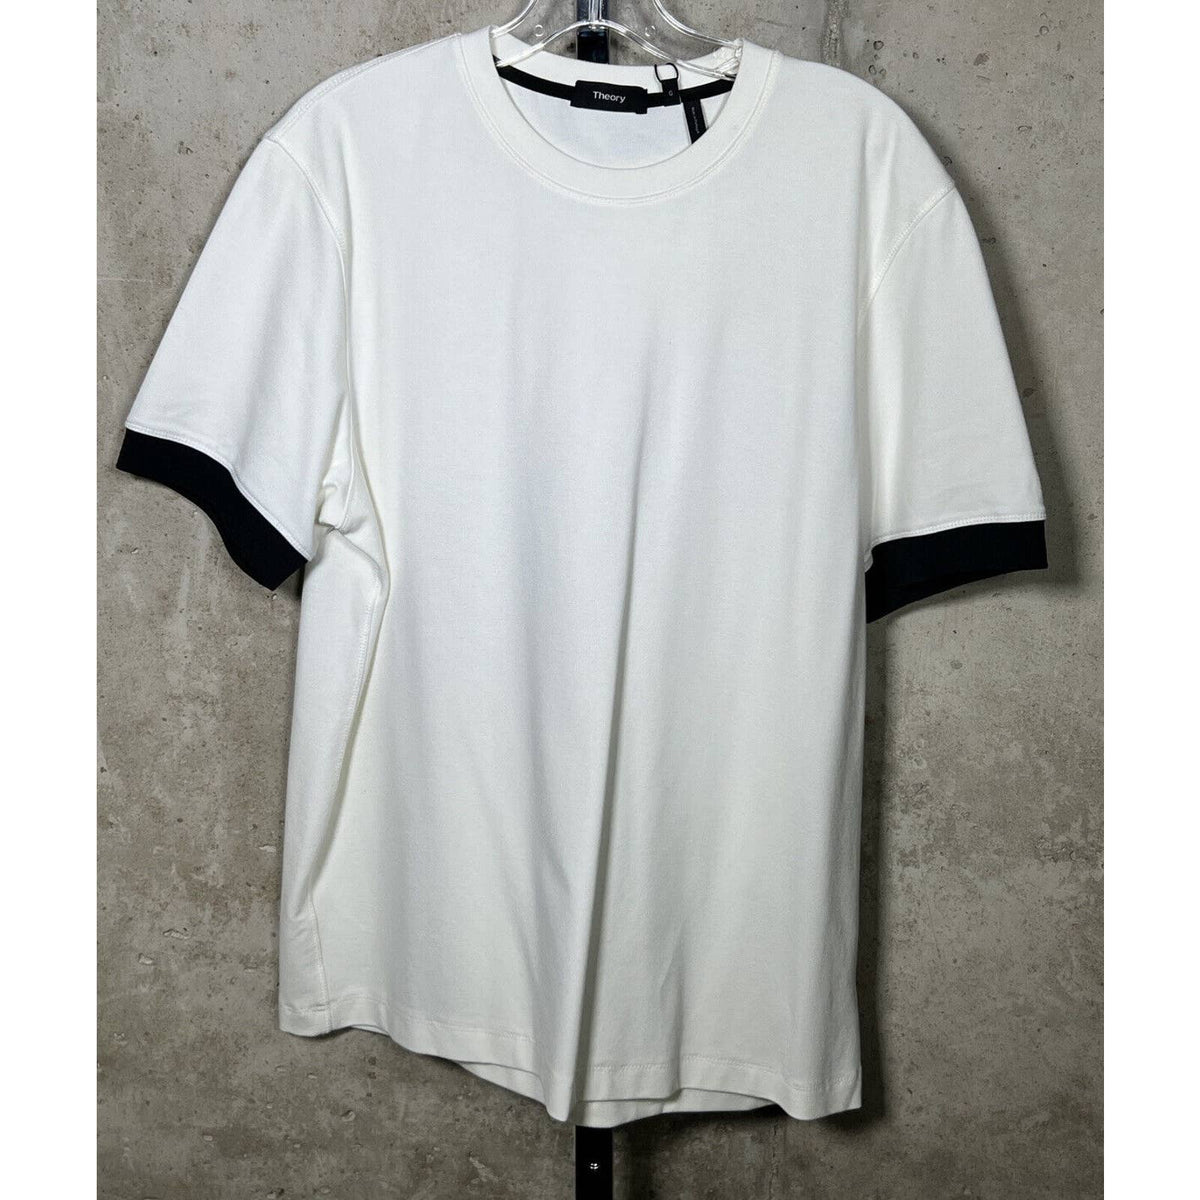 Theory Ace Short Sleeve Relay Jersey Tee Sz. Large